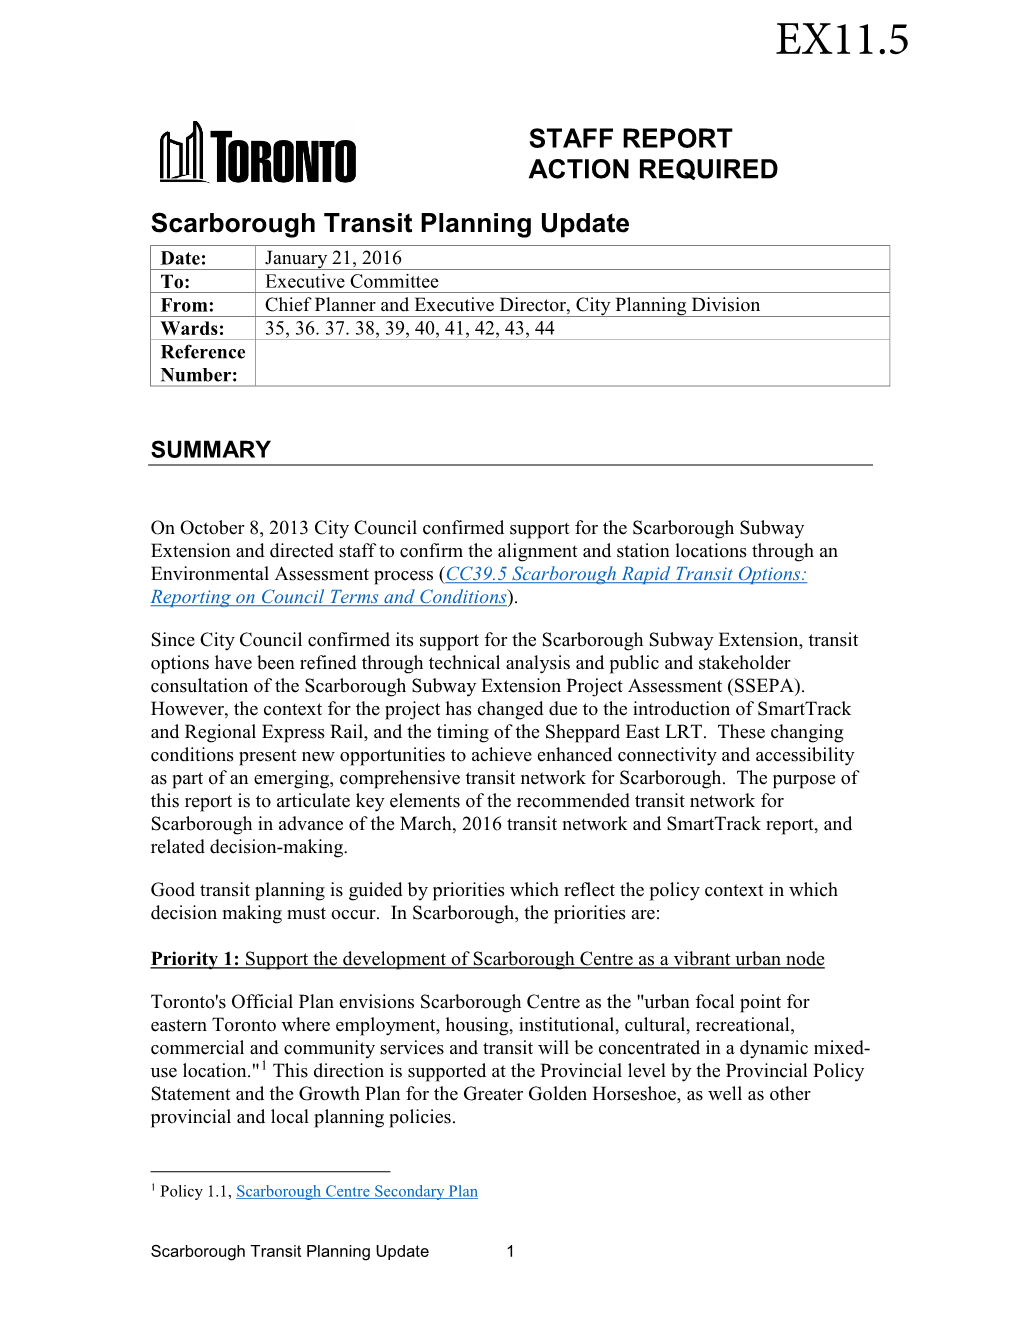 STAFF REPORT ACTION REQUIRED Scarborough Transit Planning Update